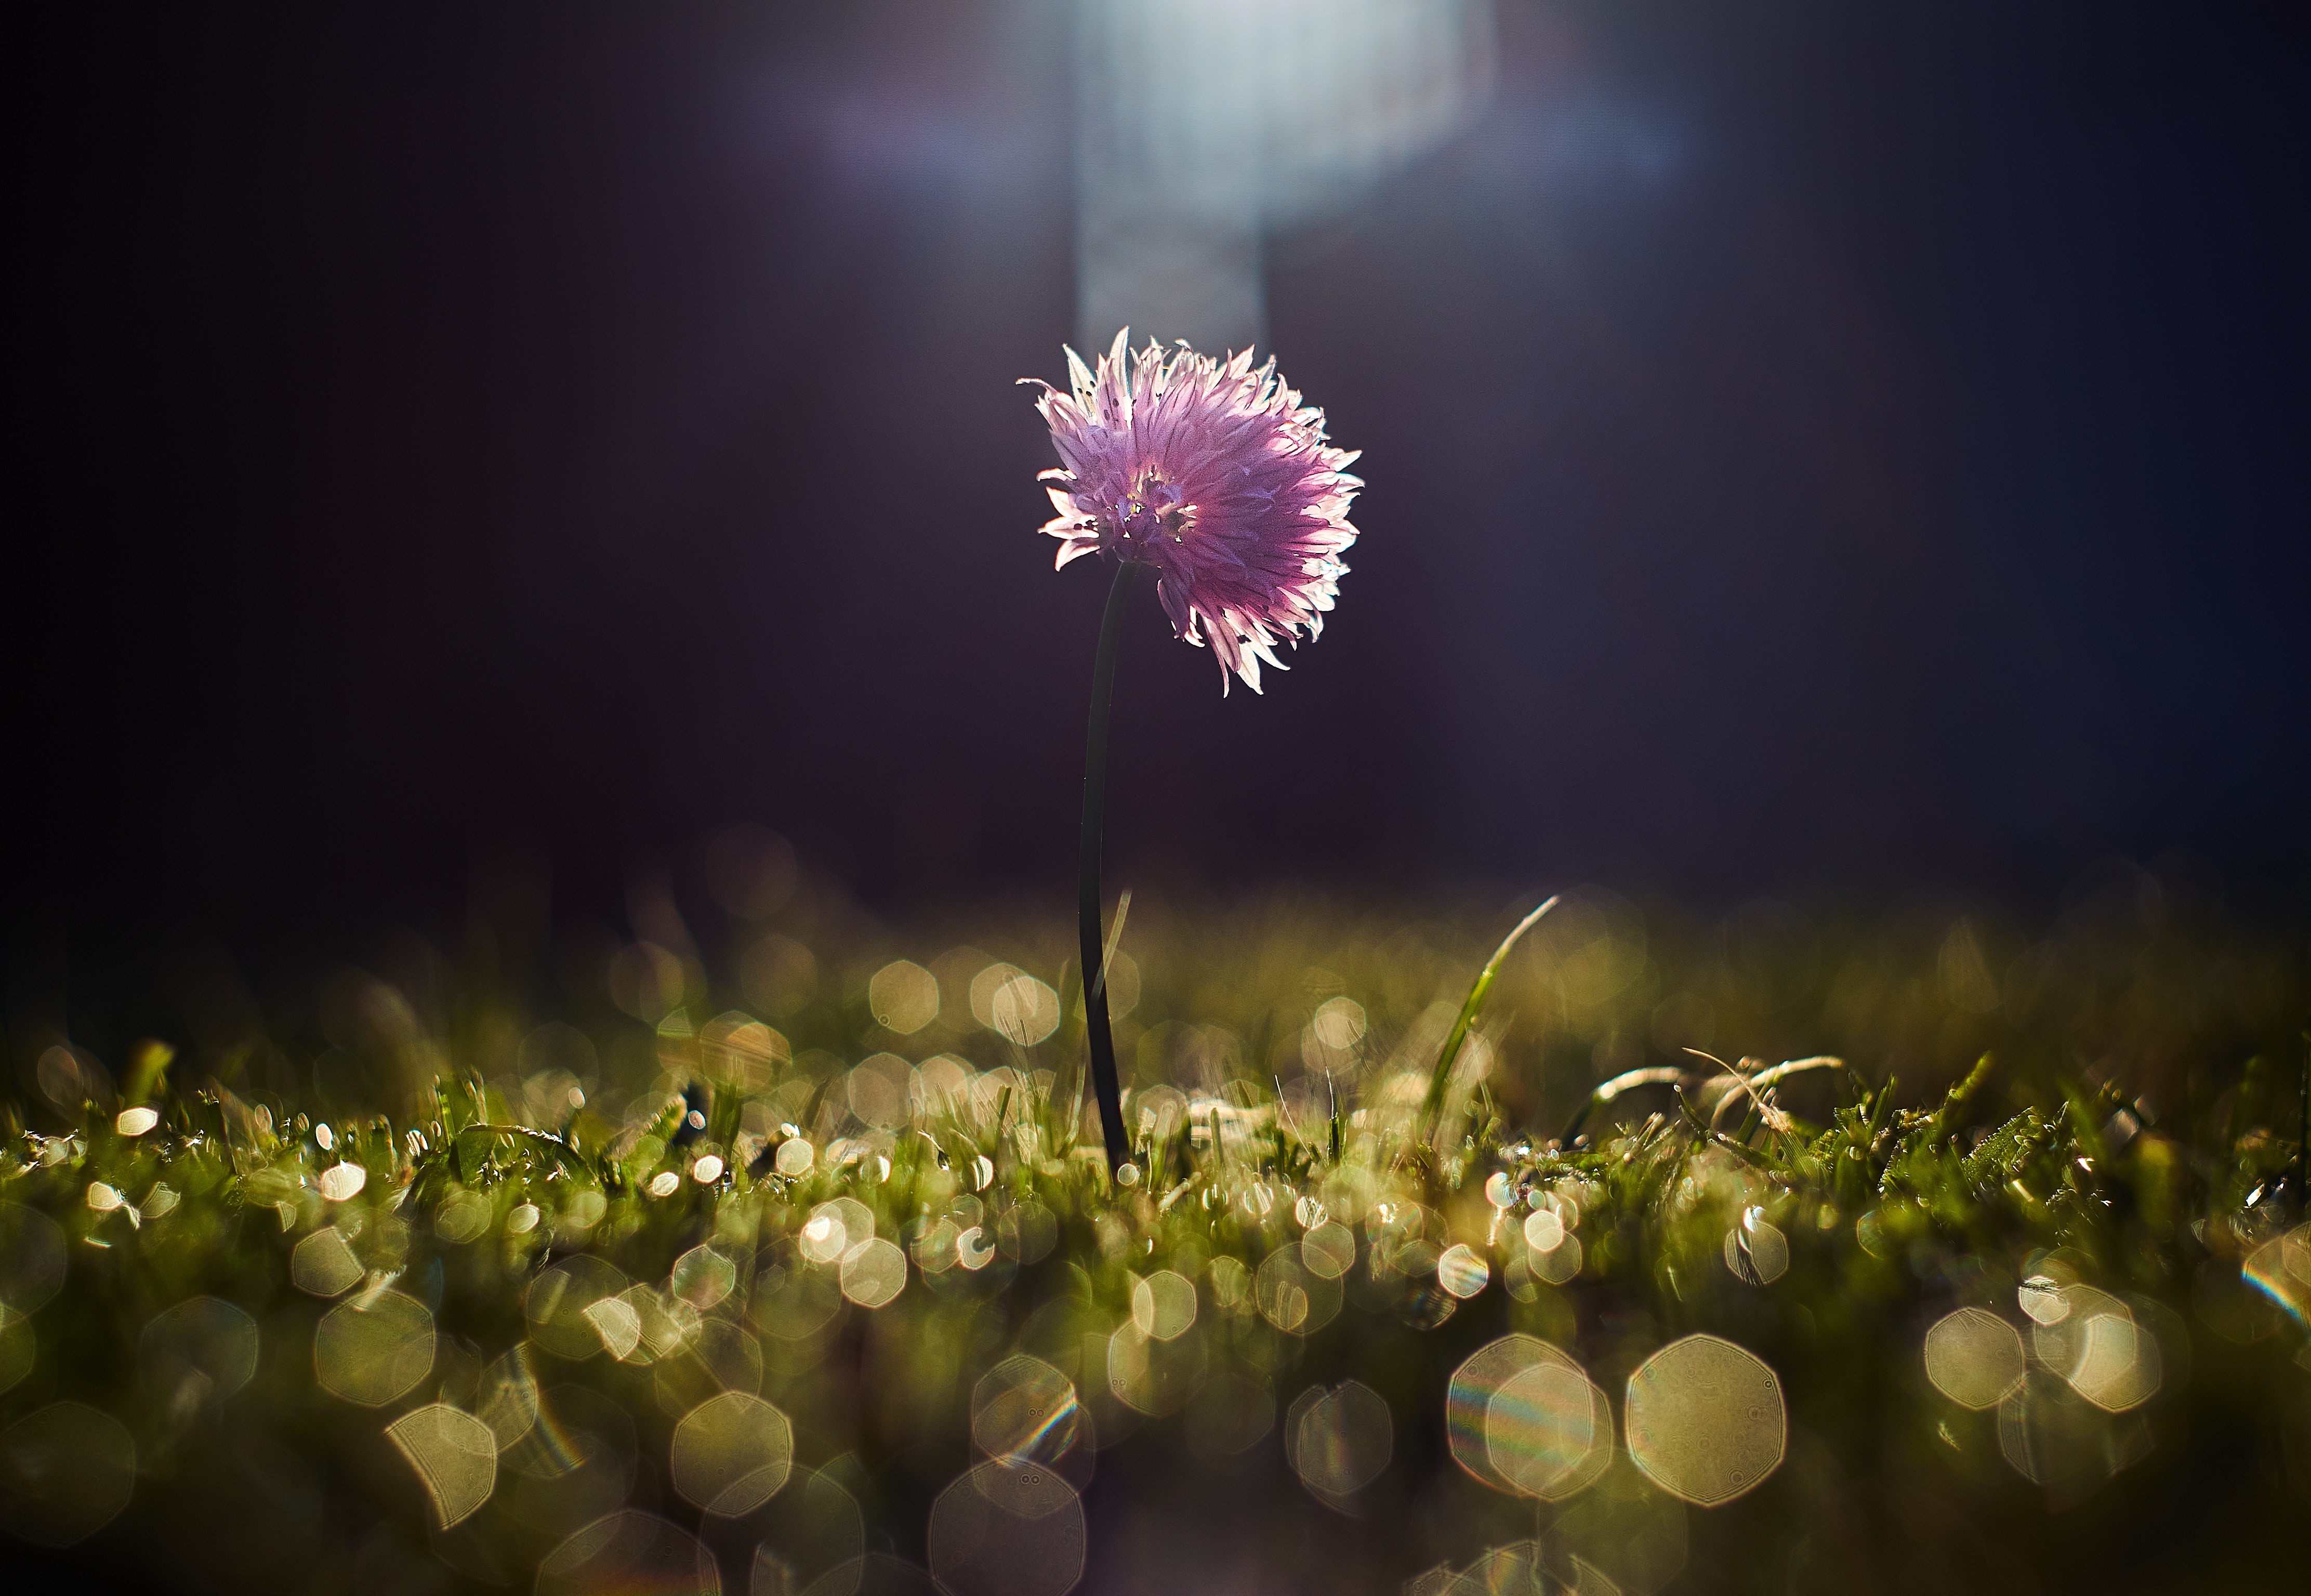 Flower in the grass